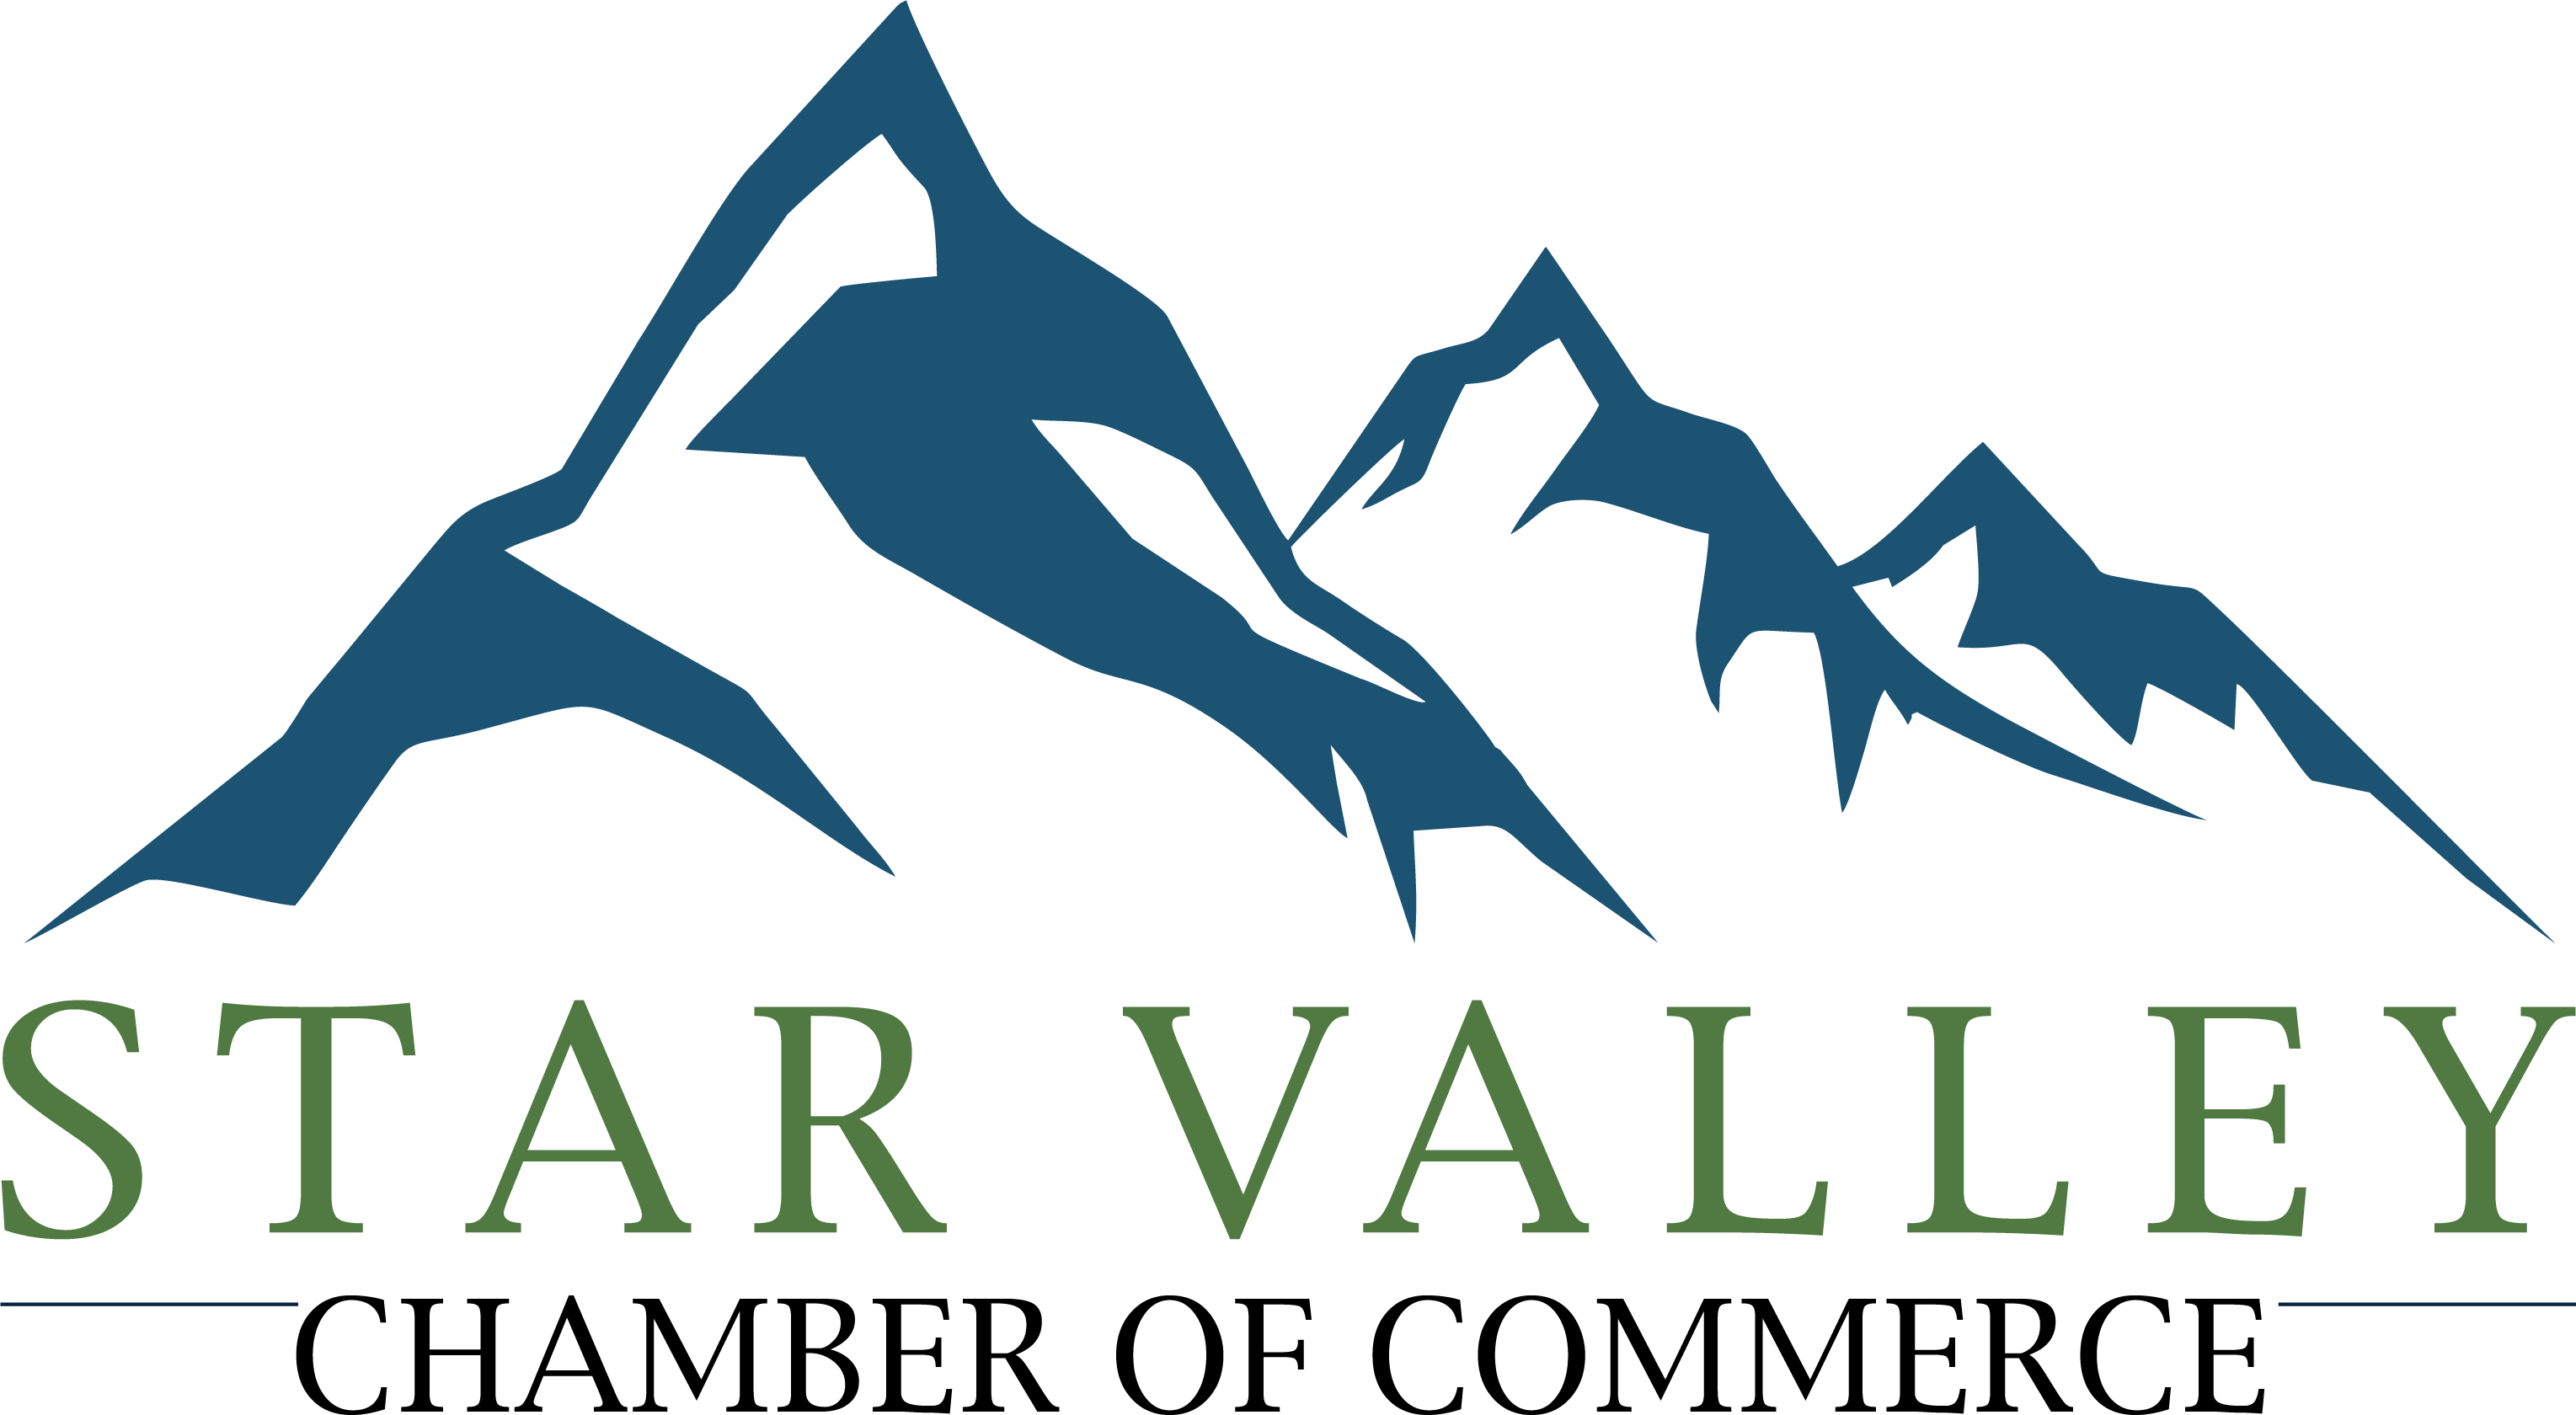 Star Valley Chamber of Commerce